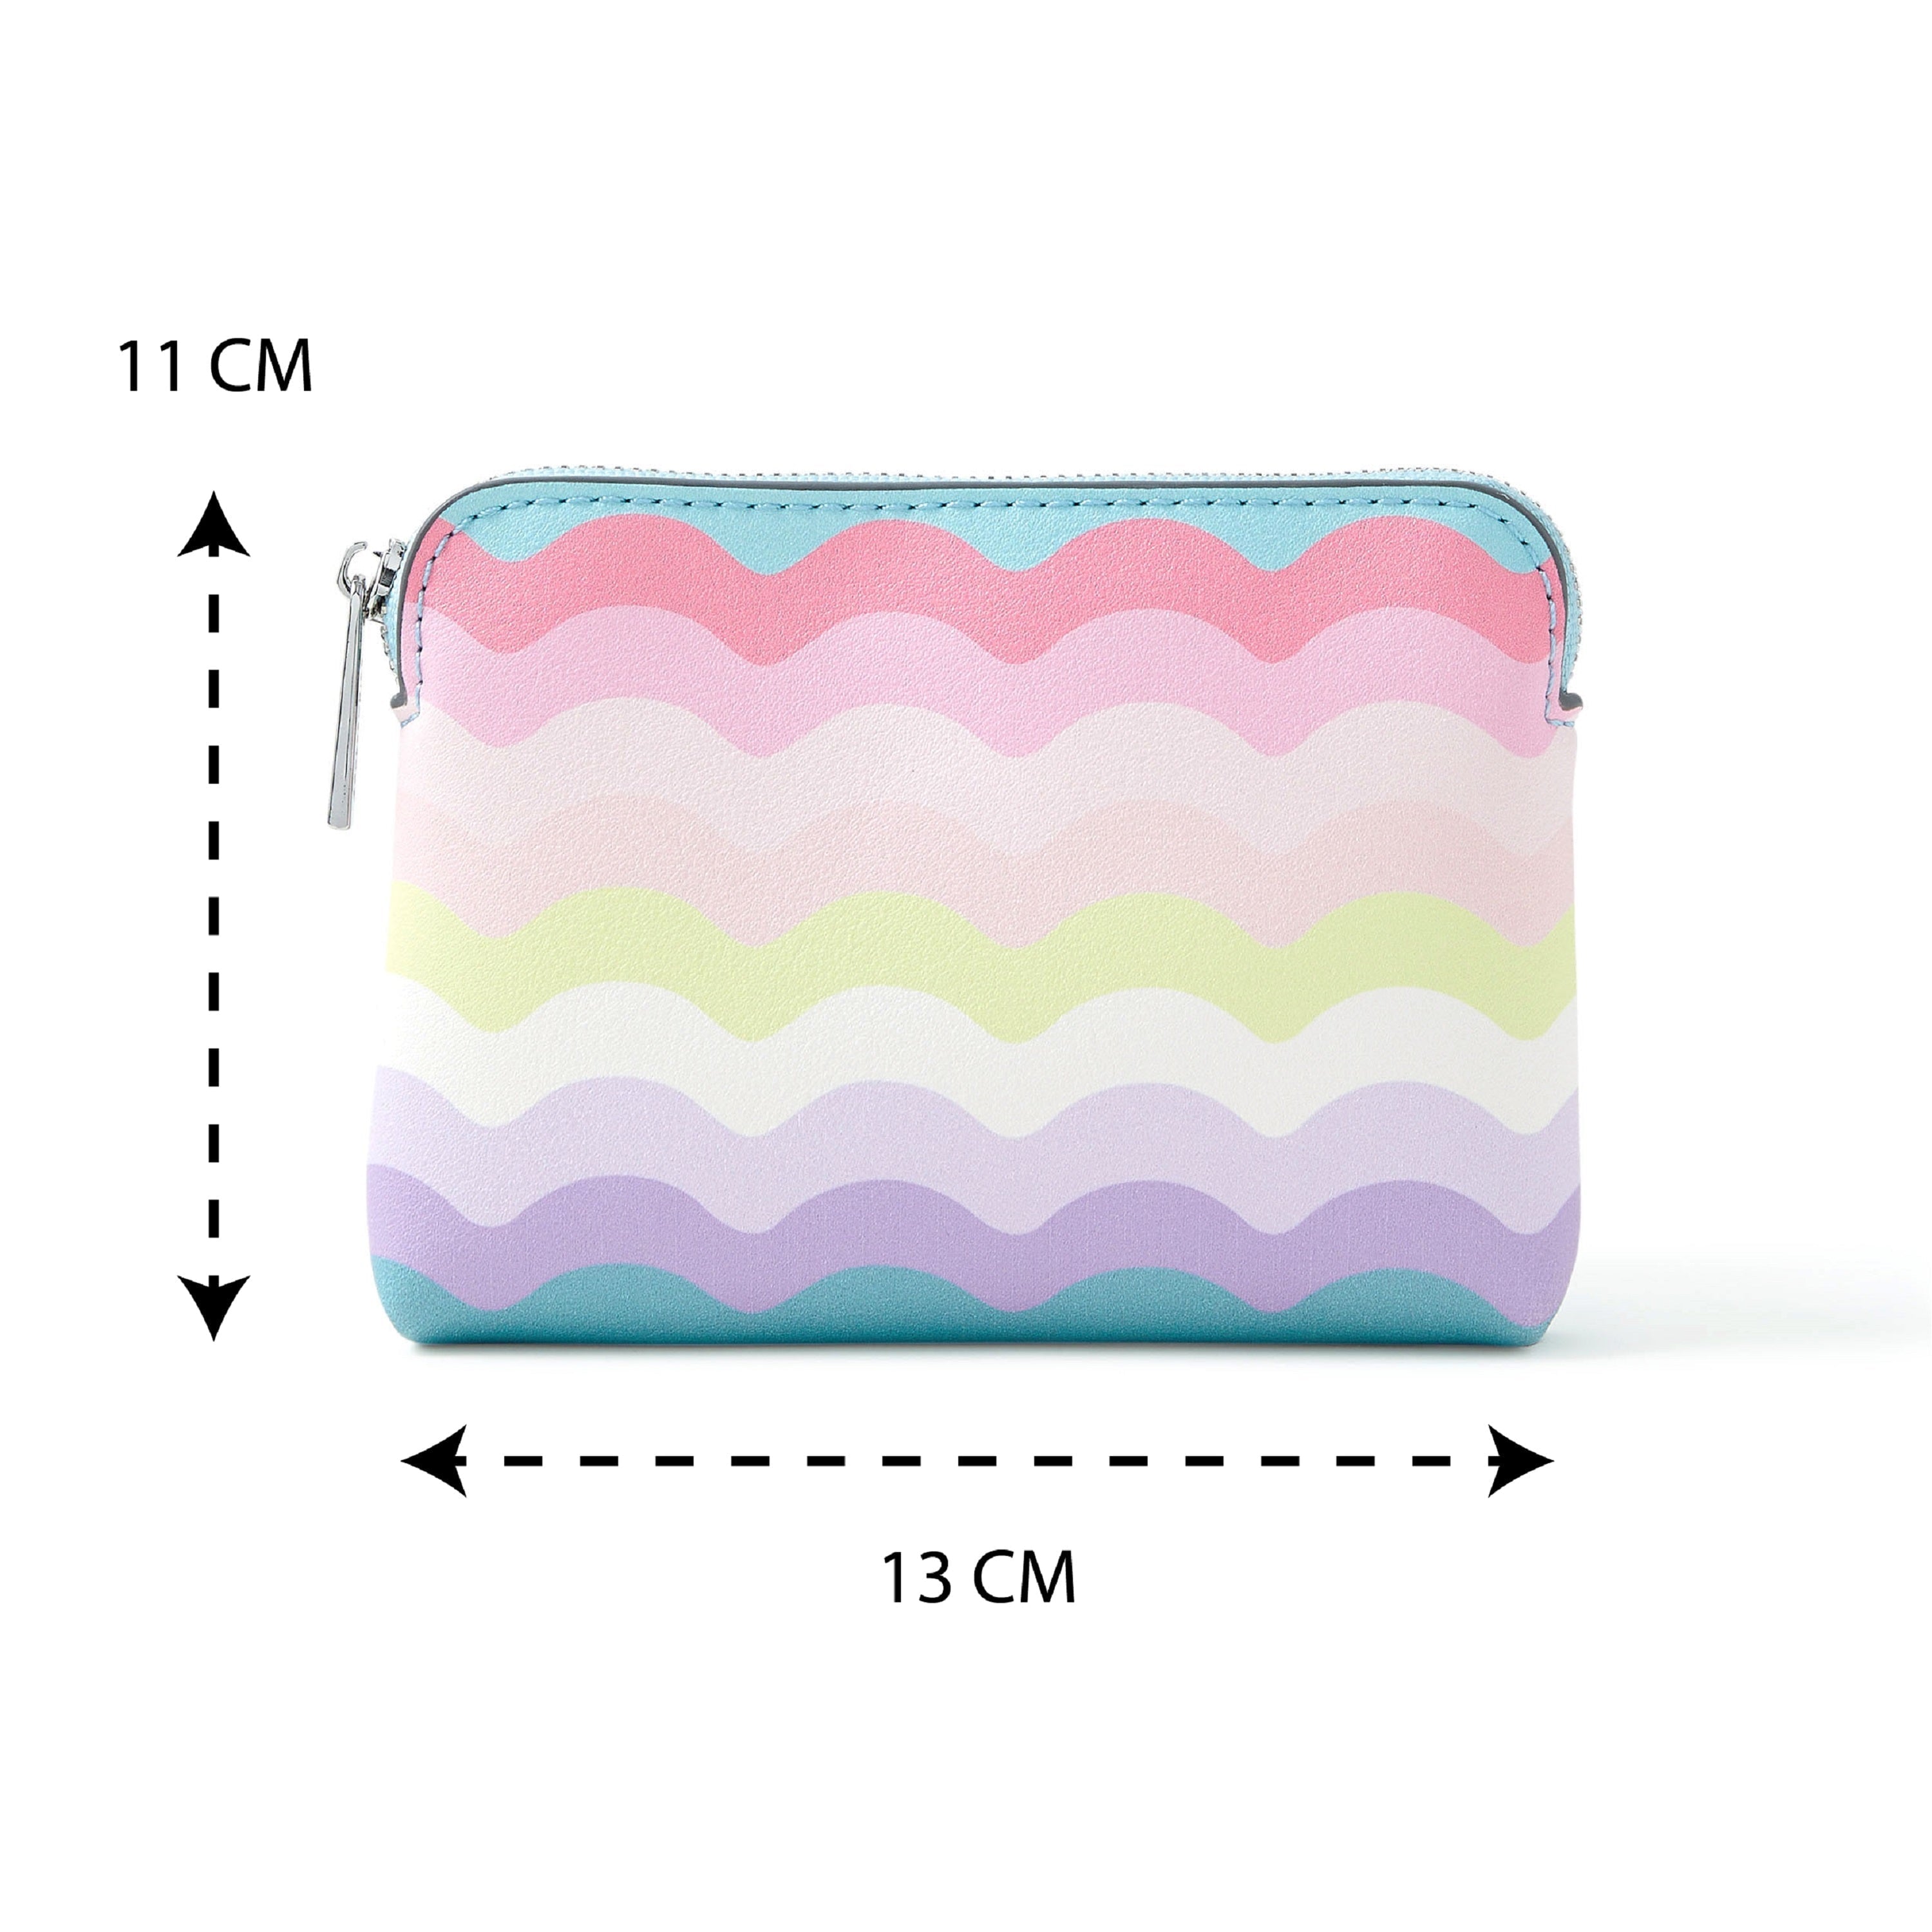 Accessorize London Women's Faux Leather Pink Rainbow Coin Purse